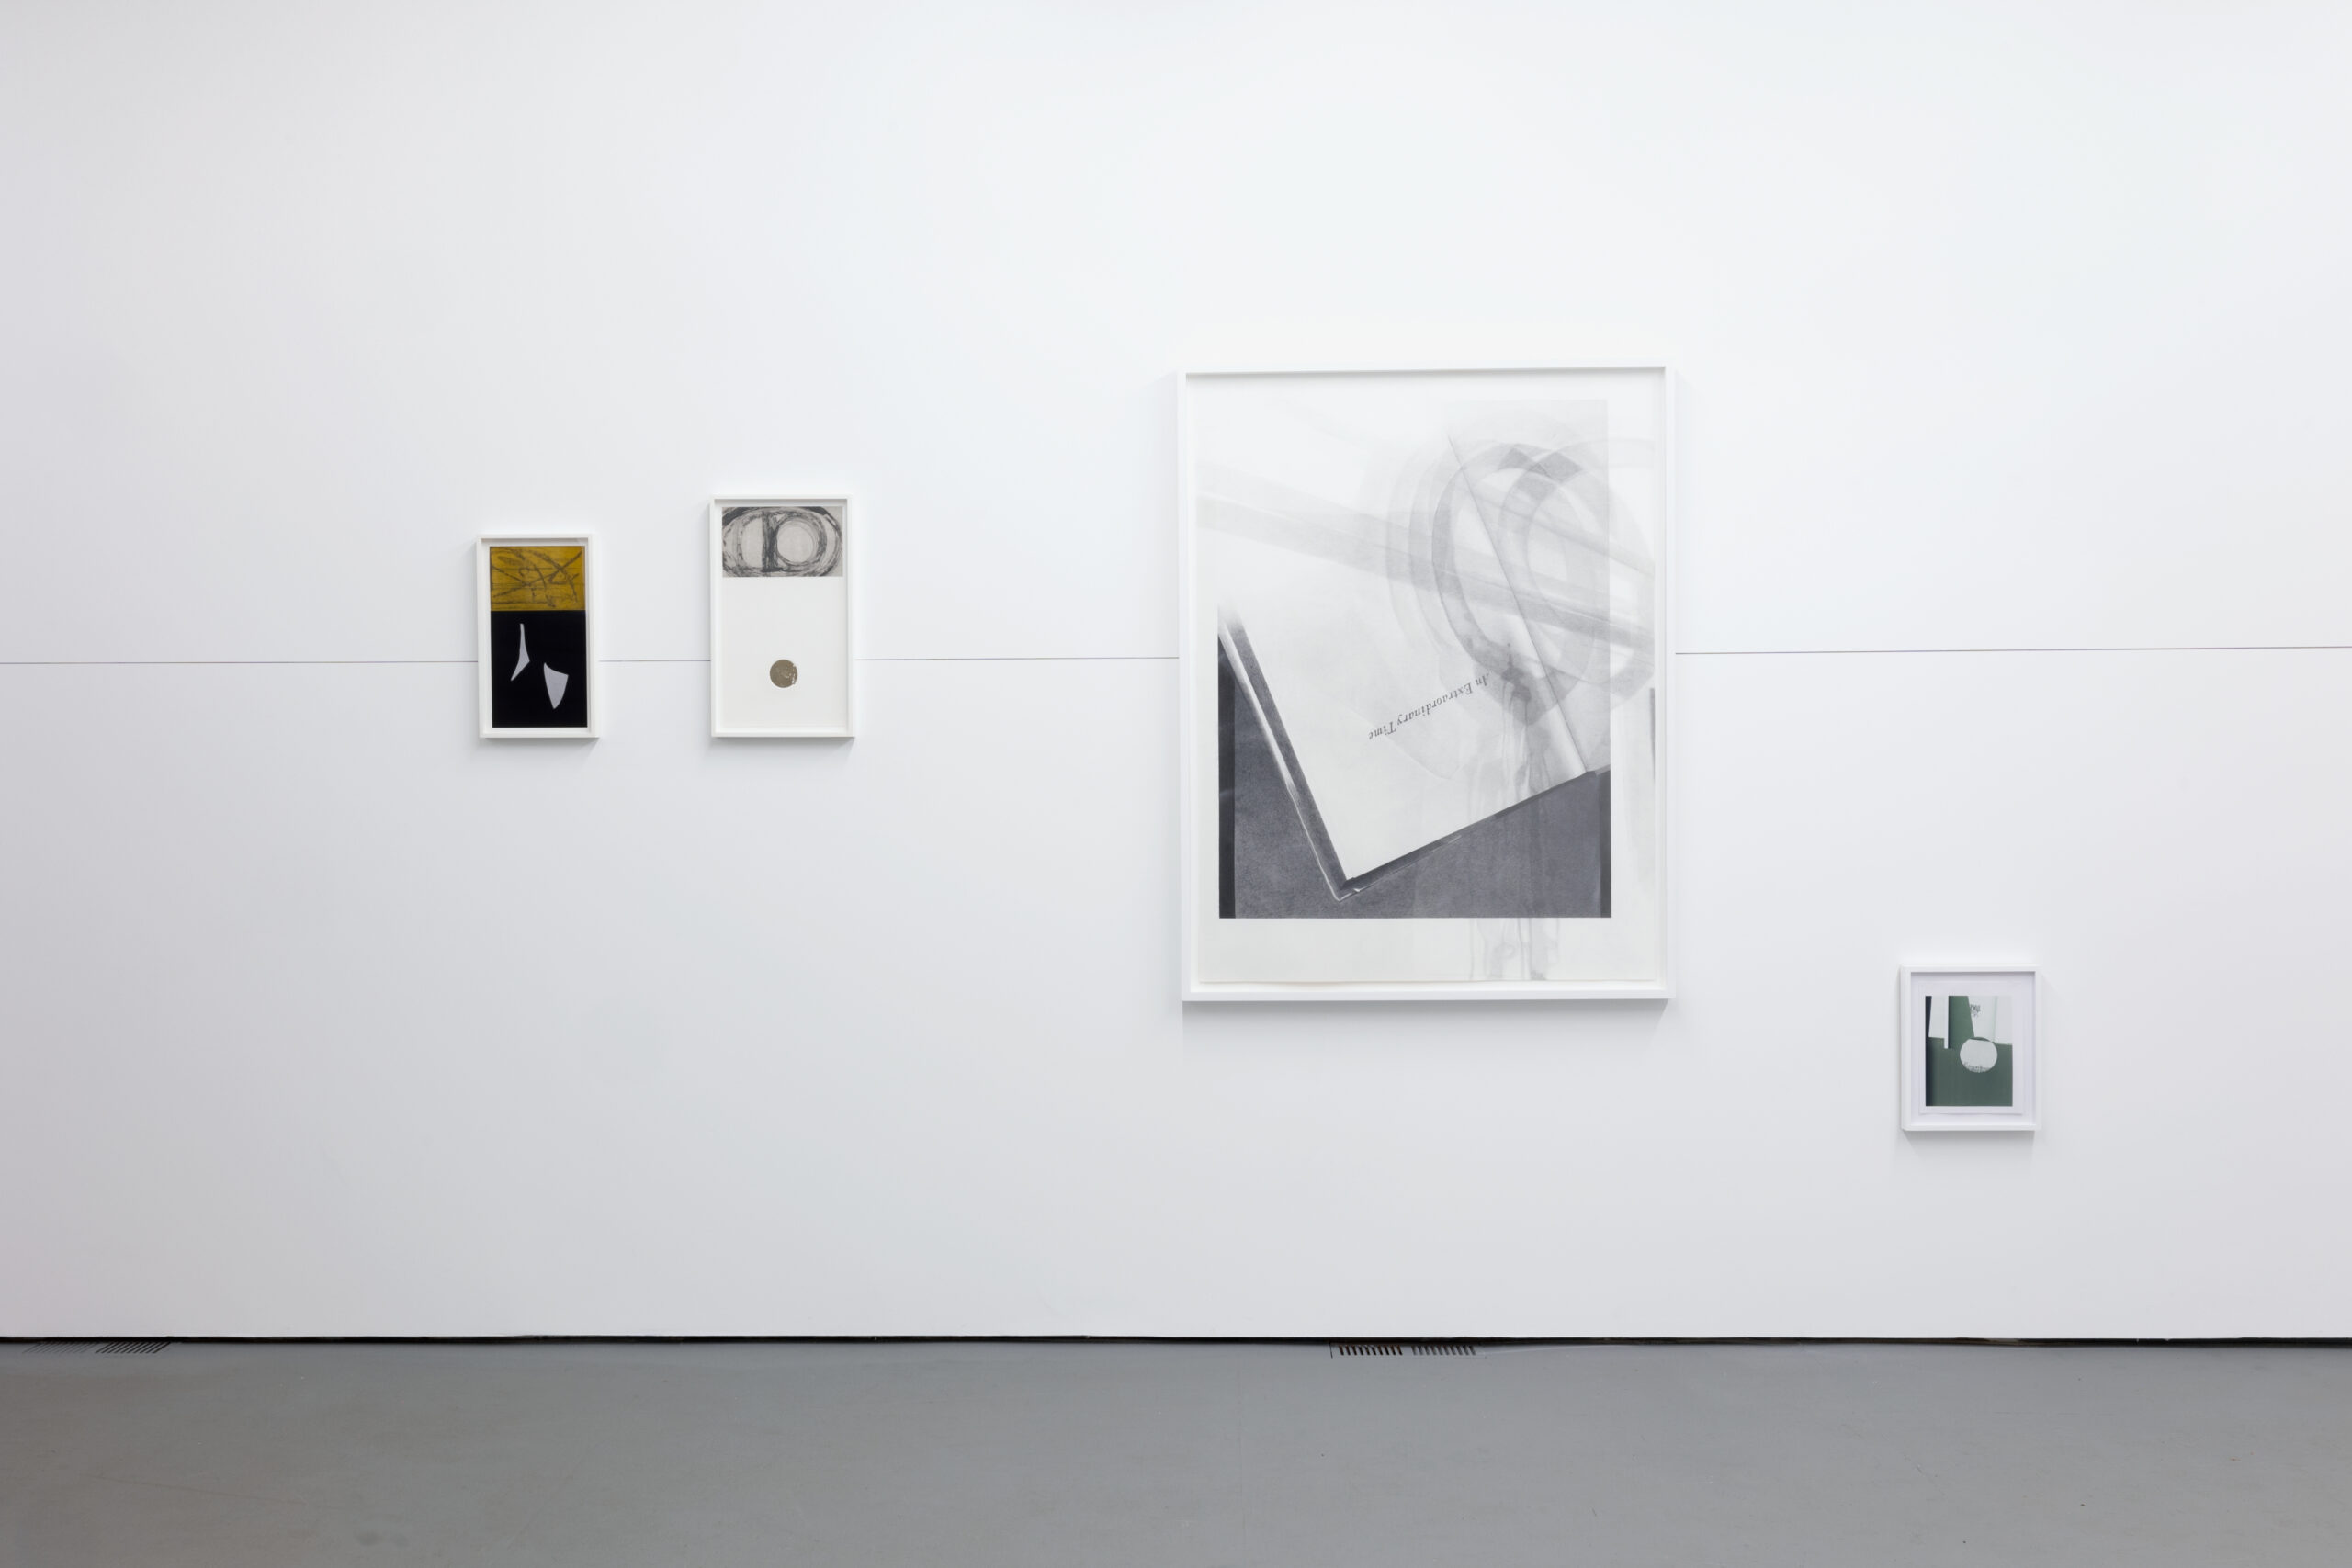 Four artworks in muted colors and various sizes arranged on a white gallery wall.